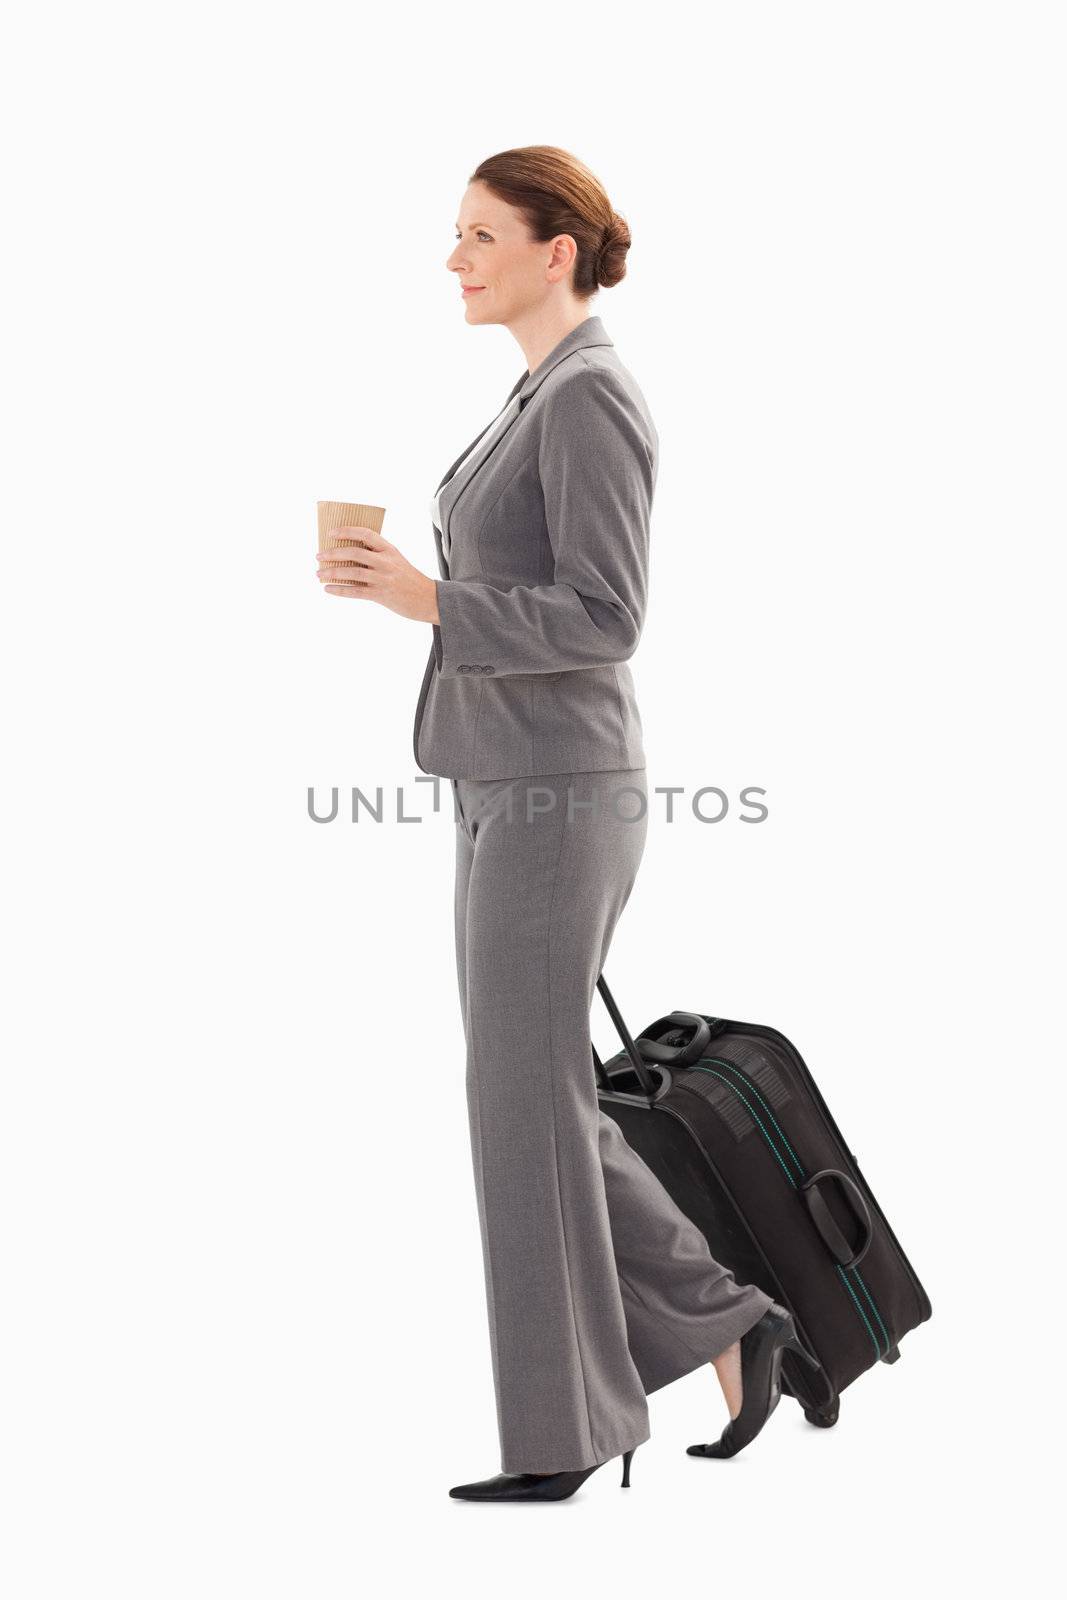 A businesswoman with a suitcase is holding coffee